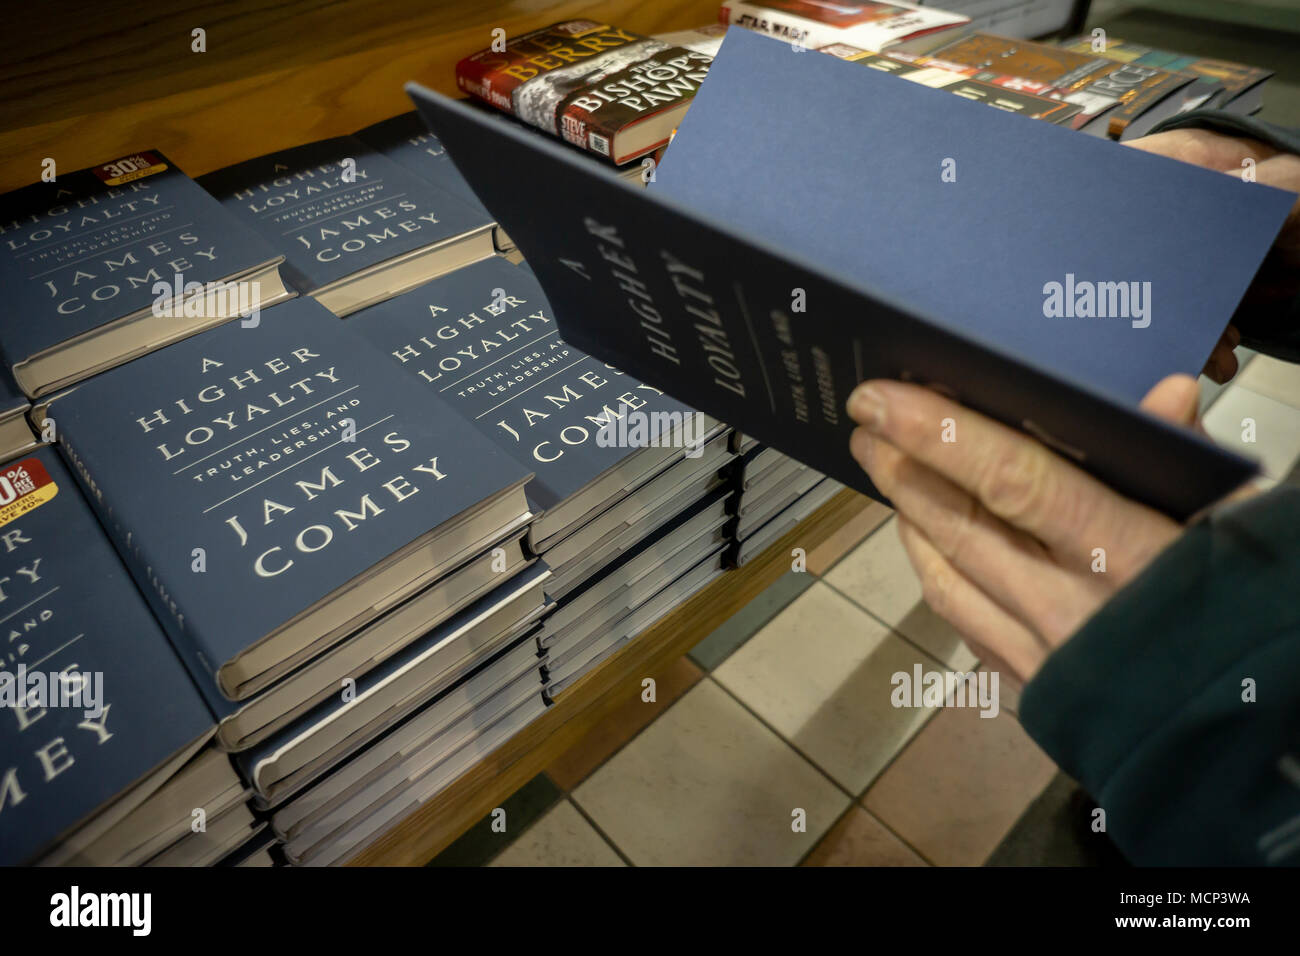 Copies of former FBI Director James Comey's book 'A Higher Loyalty: Truth, Lies, and Leadership' about President Donald Trump in a Barnes & Noble bookstore in New York on the day of its release, Tuesday, April 17, 2018. The publisher Macmillan has printed 850,000 copies of the book in anticipation of the expected demand. The first run of the last Trump book, by Michael Wolff, 'Fire and Fury', also published by Macmillan, was initially only 150,000 copies. (Â© Richard B. Levine) Stock Photo